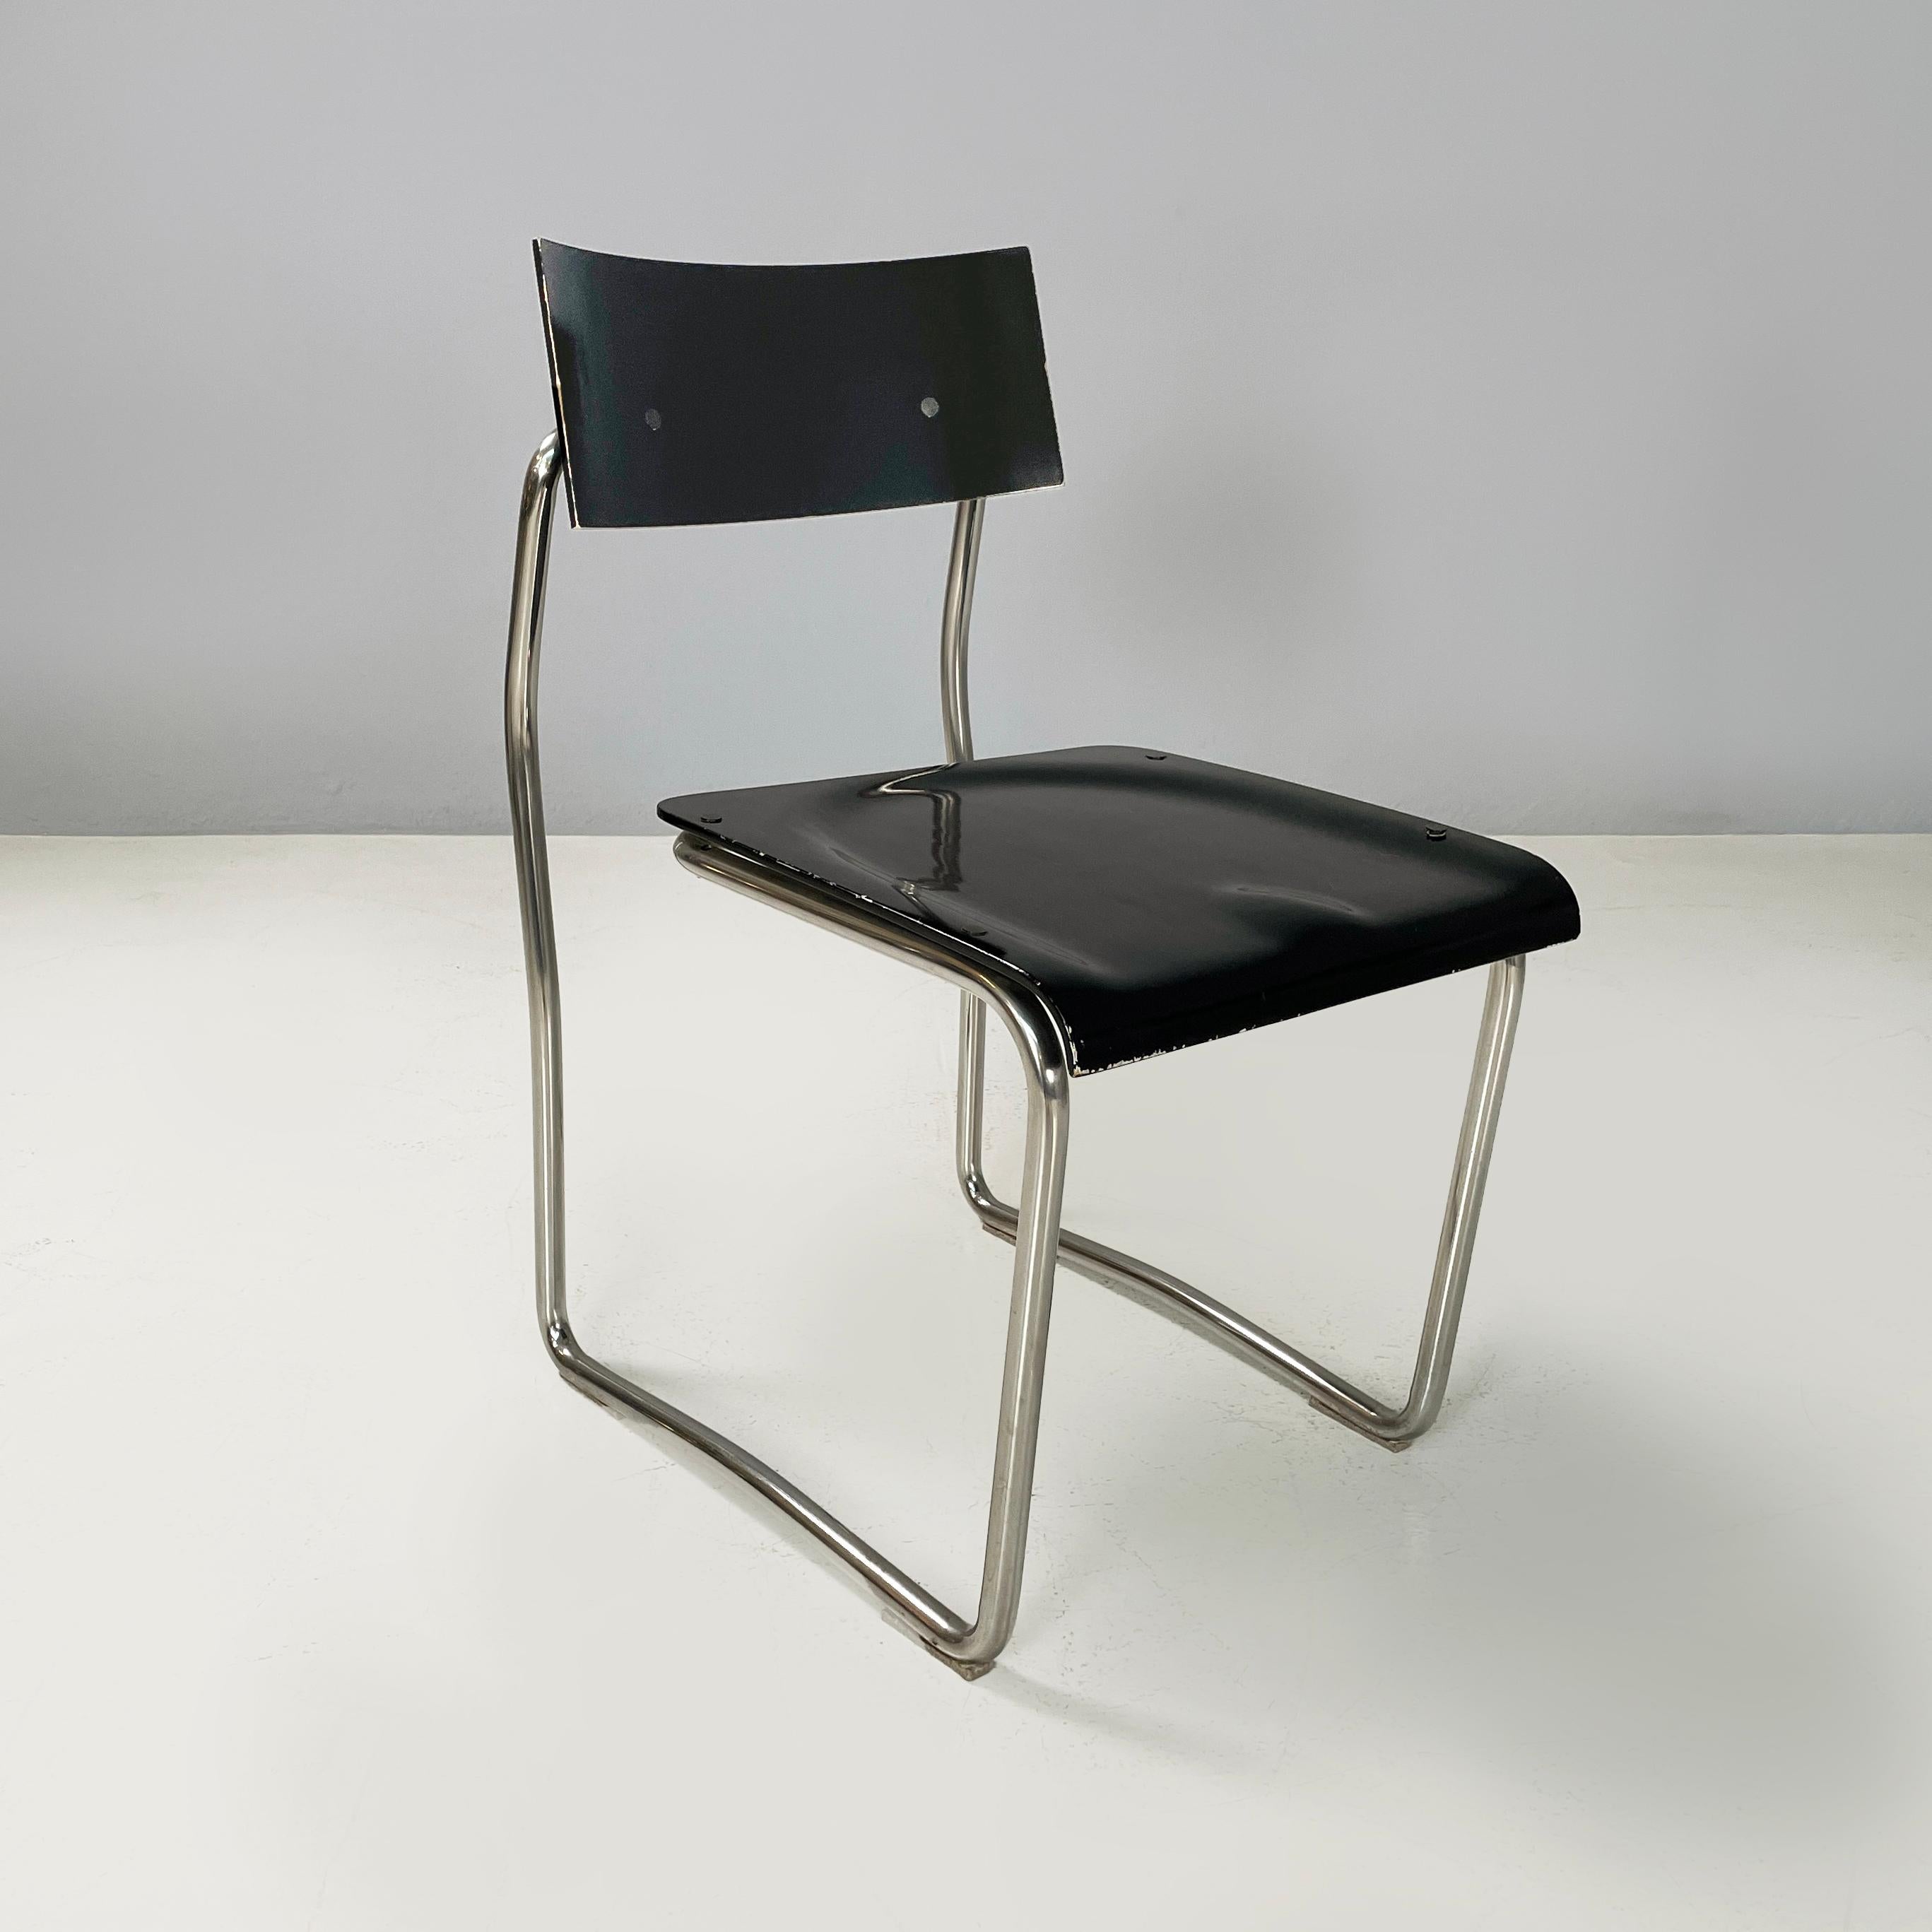 Italian modern Black chair and metal Chairs Lariana by Giuseppe Terragni for Zanotta, 1980s
Set of 4 chairs mod. Lariana with a curved rectangular backrest and shaped seat in black painted wood. The structure is made up of a single chromed metal